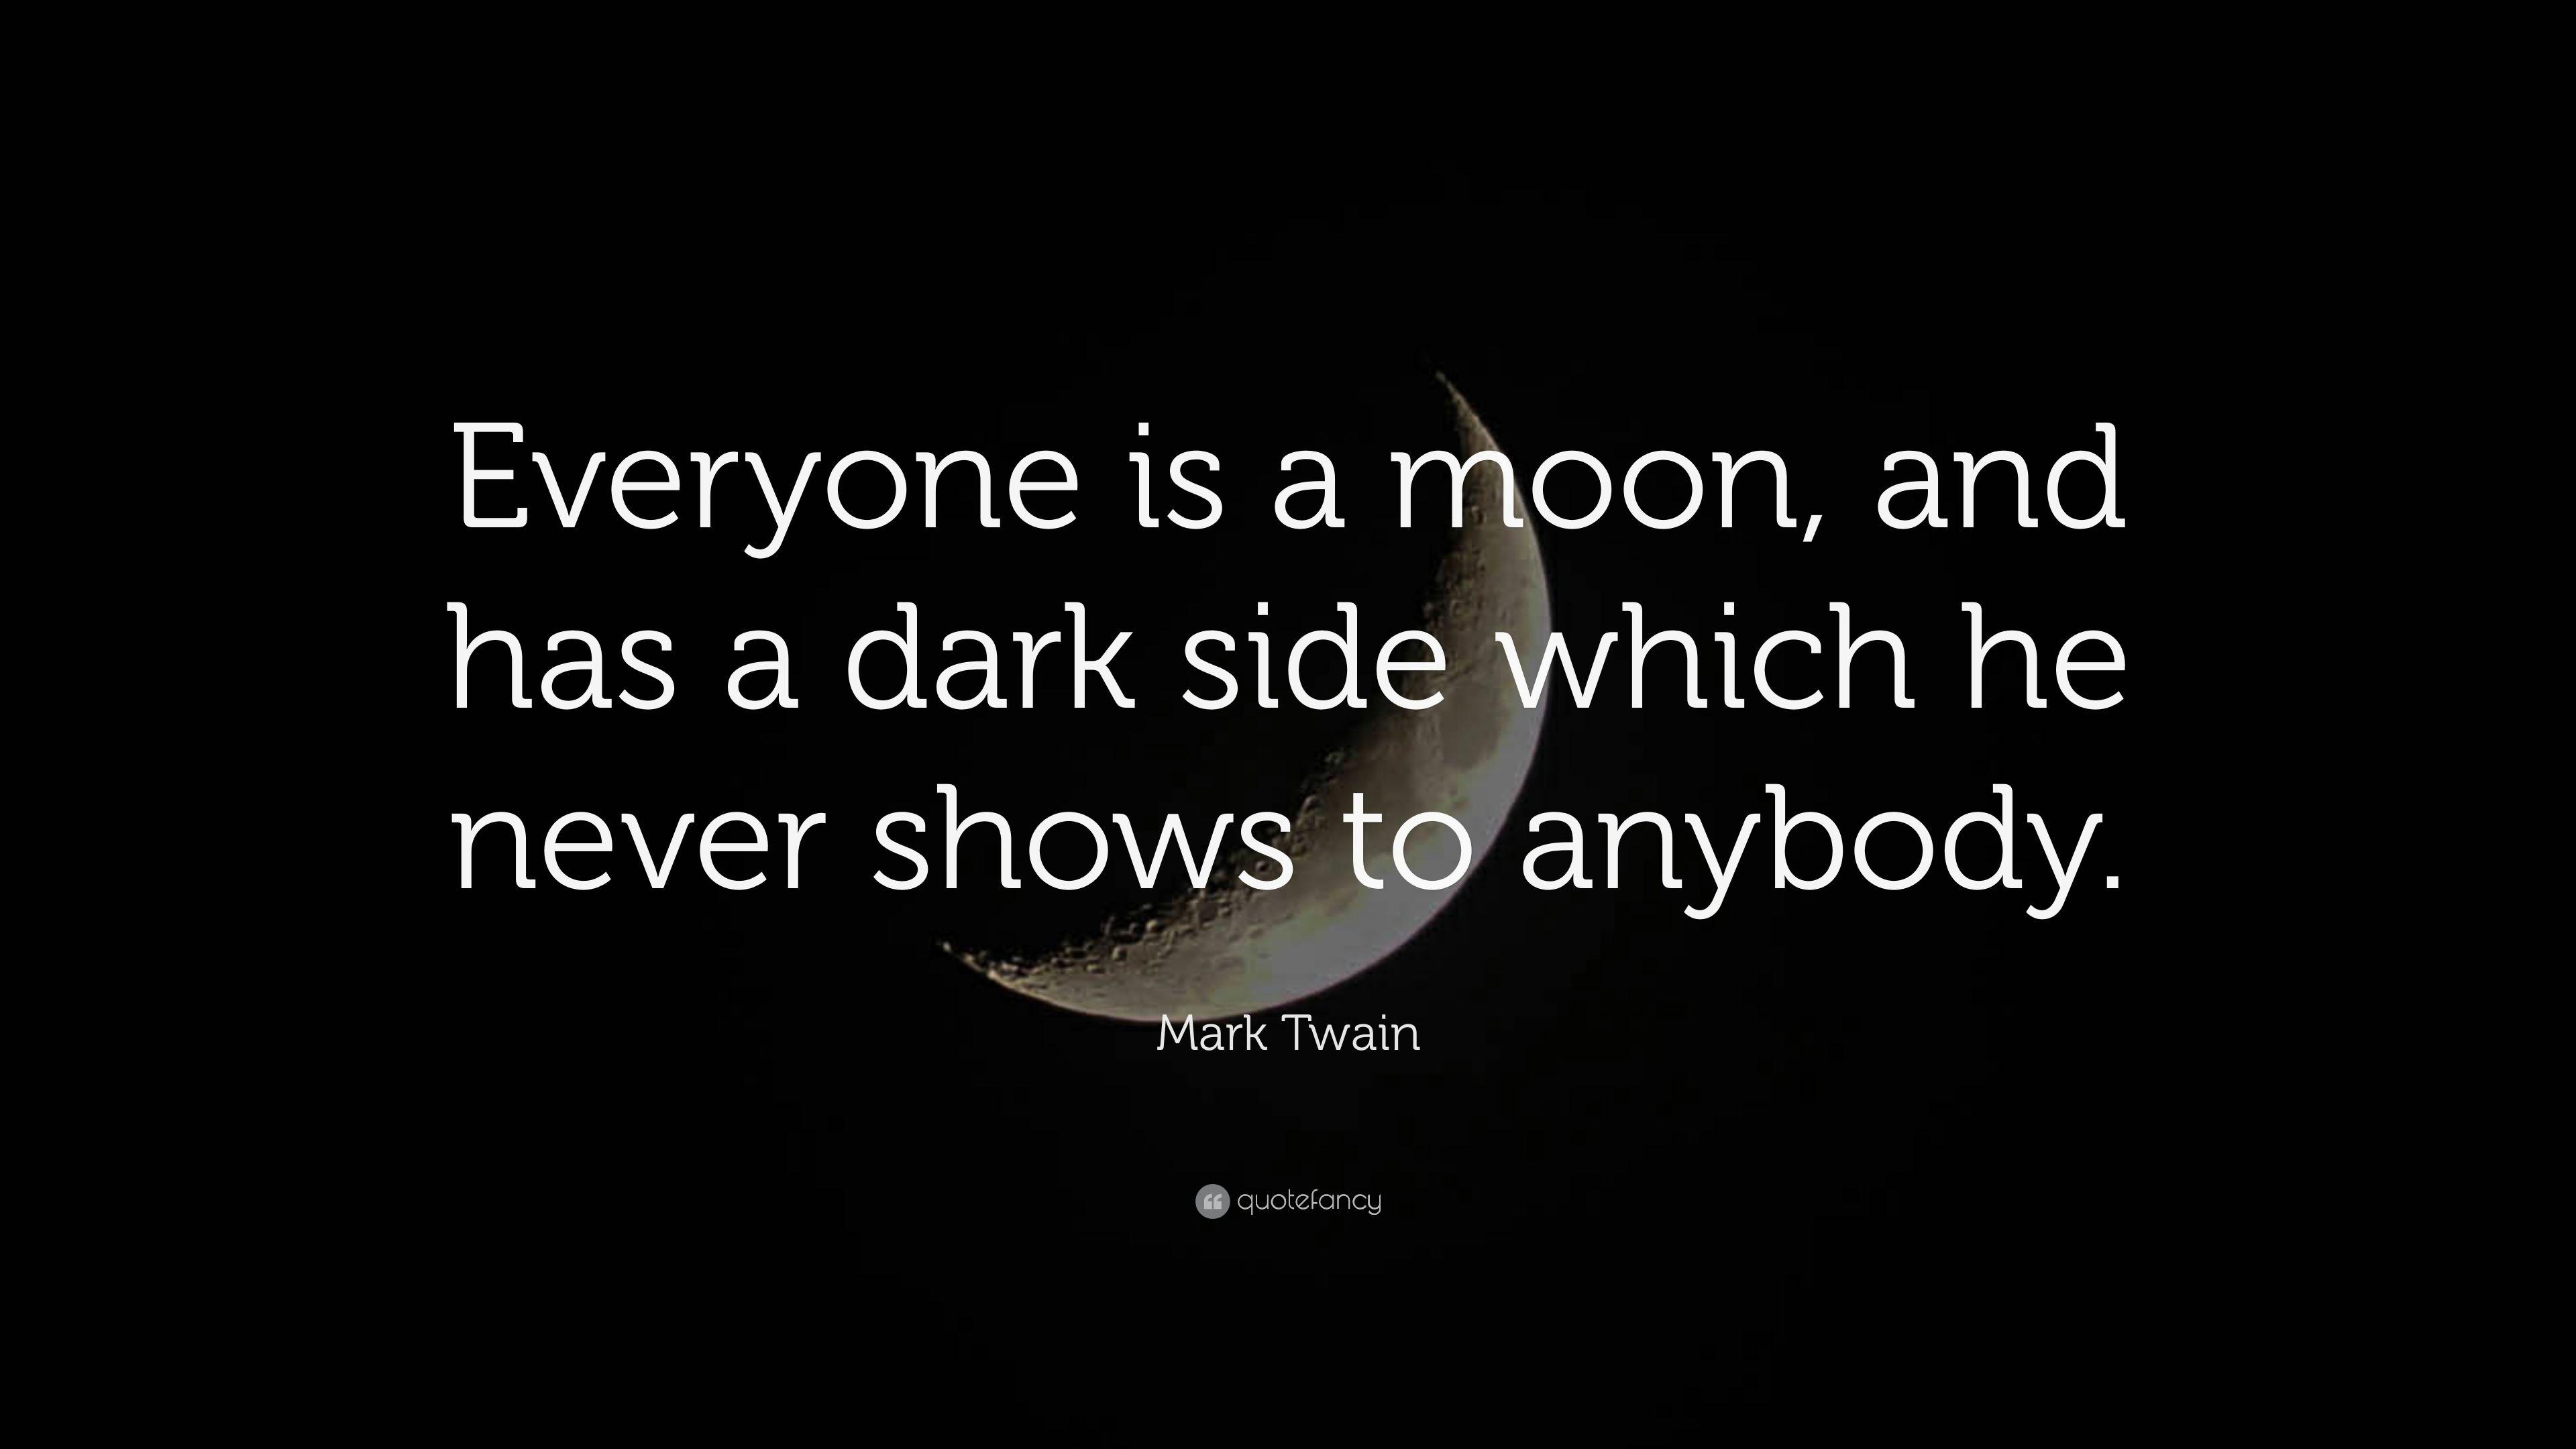 Mark Twain Quote: “Everyone is a moon, and has a dark side which he